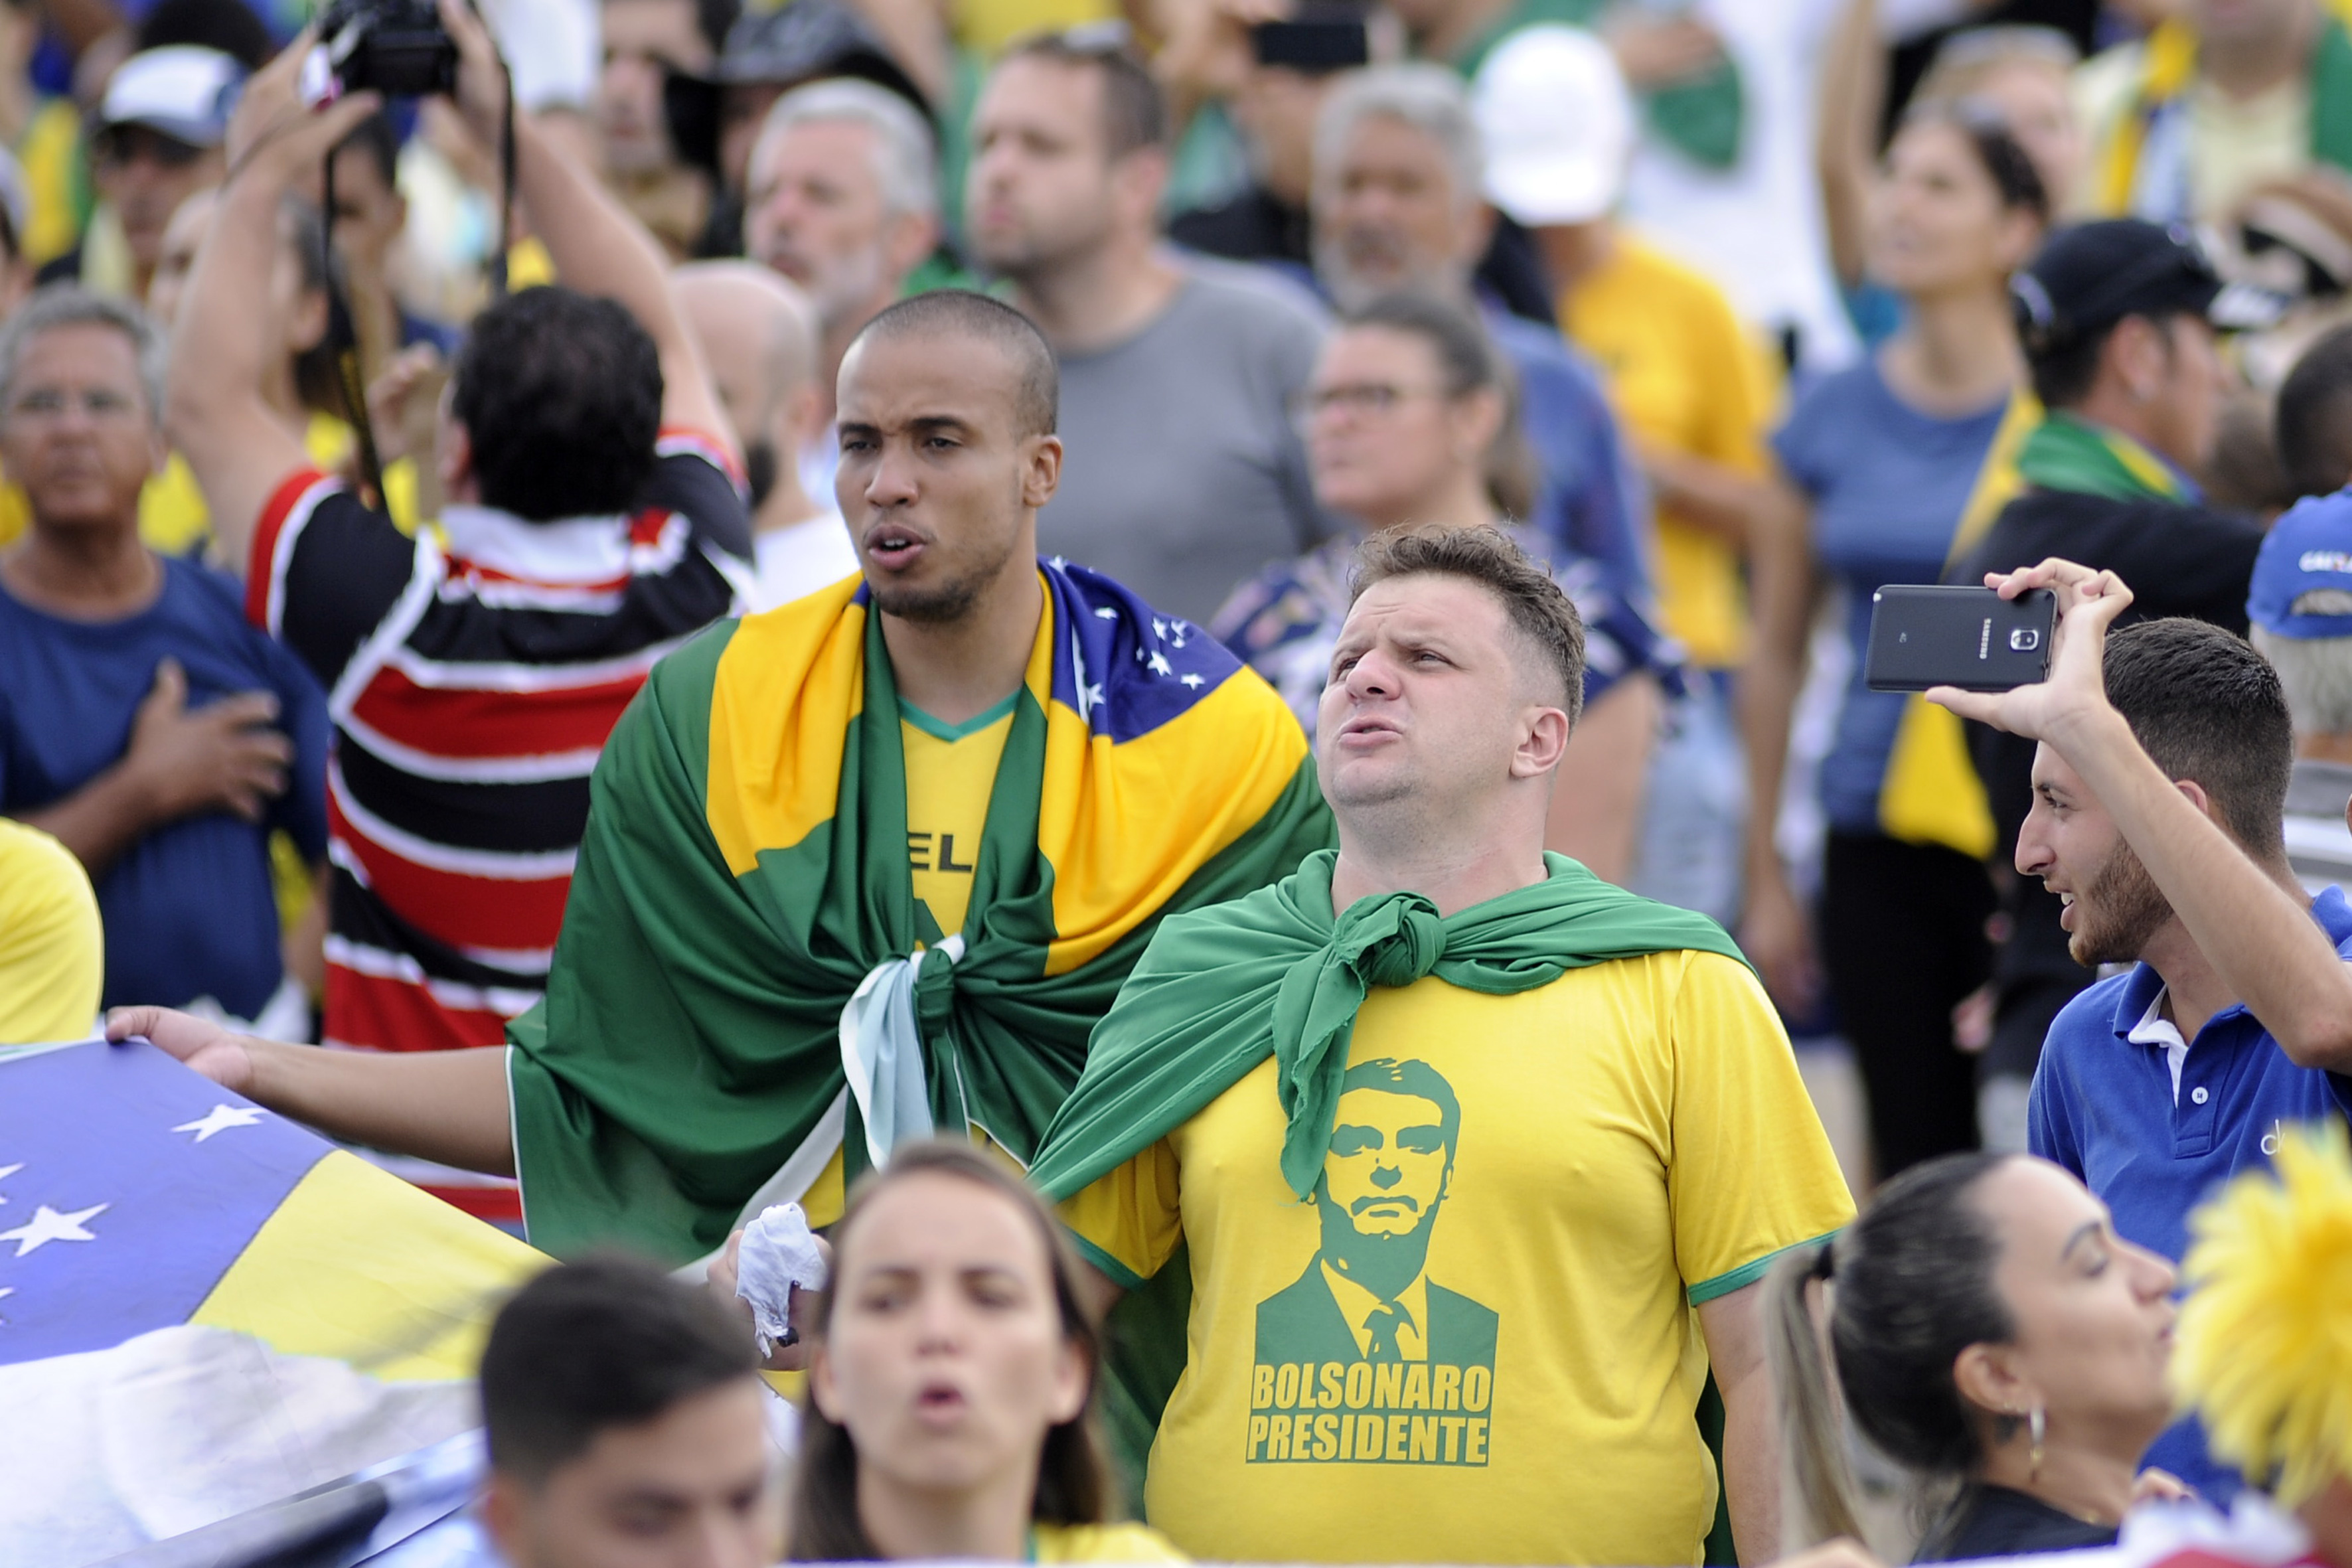 01 January 2019, Brazil, Brasilia: People take part in the inauguration of President designate Jair Messias Bolsonaro. 500,000 visitors were expected at the inauguration. More than 3000 policemen and soldiers are to provide security. Air defence missiles and fighter jets are also ready for action. Photo by: Alan Morici/picture-alliance/dpa/AP Images